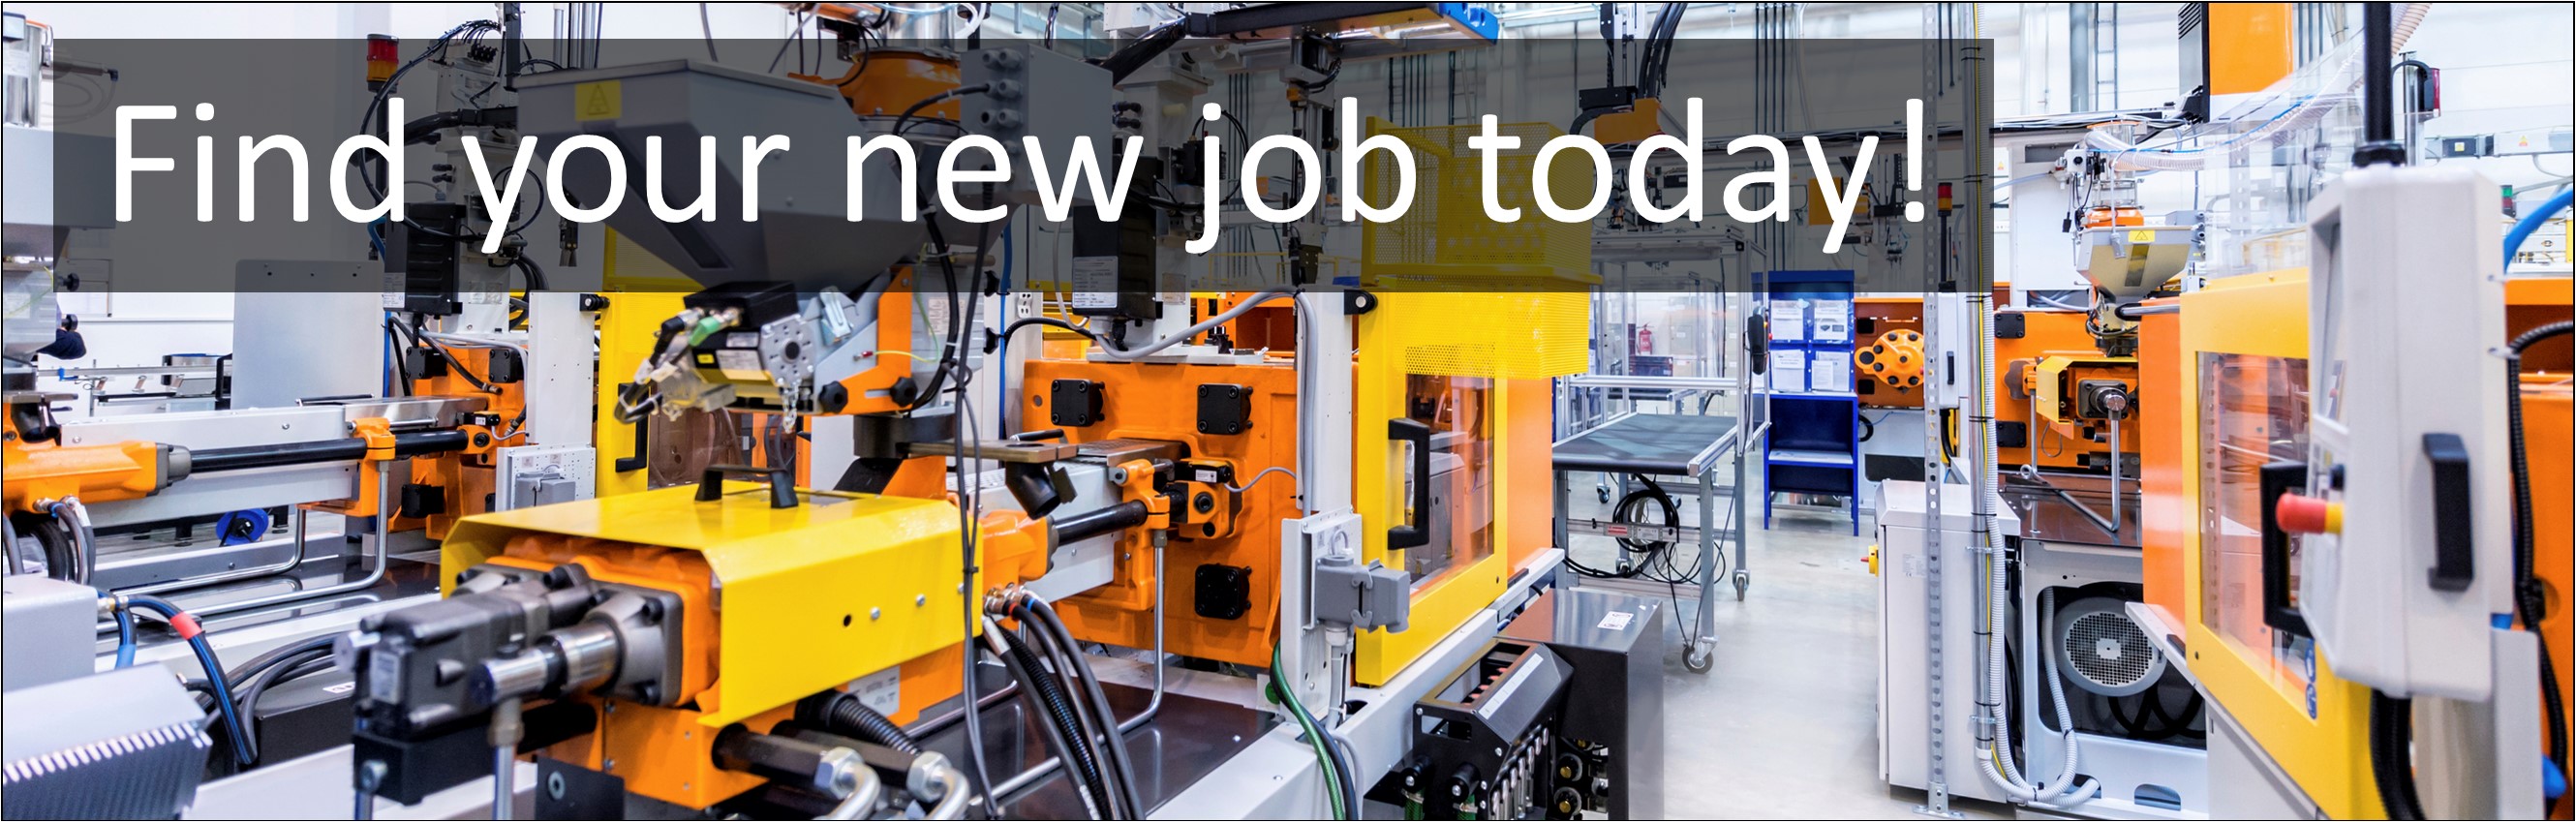 Manufacturing Jobs. Production Operative / Manufacturing PVC Cutter / Welder Trainee Jobs, Careers & Vacancies in Birkenhead, Wirral, North West England Advertised by AWD online – Multi-Job Board Advertising and CV Sourcing Recruitment Services